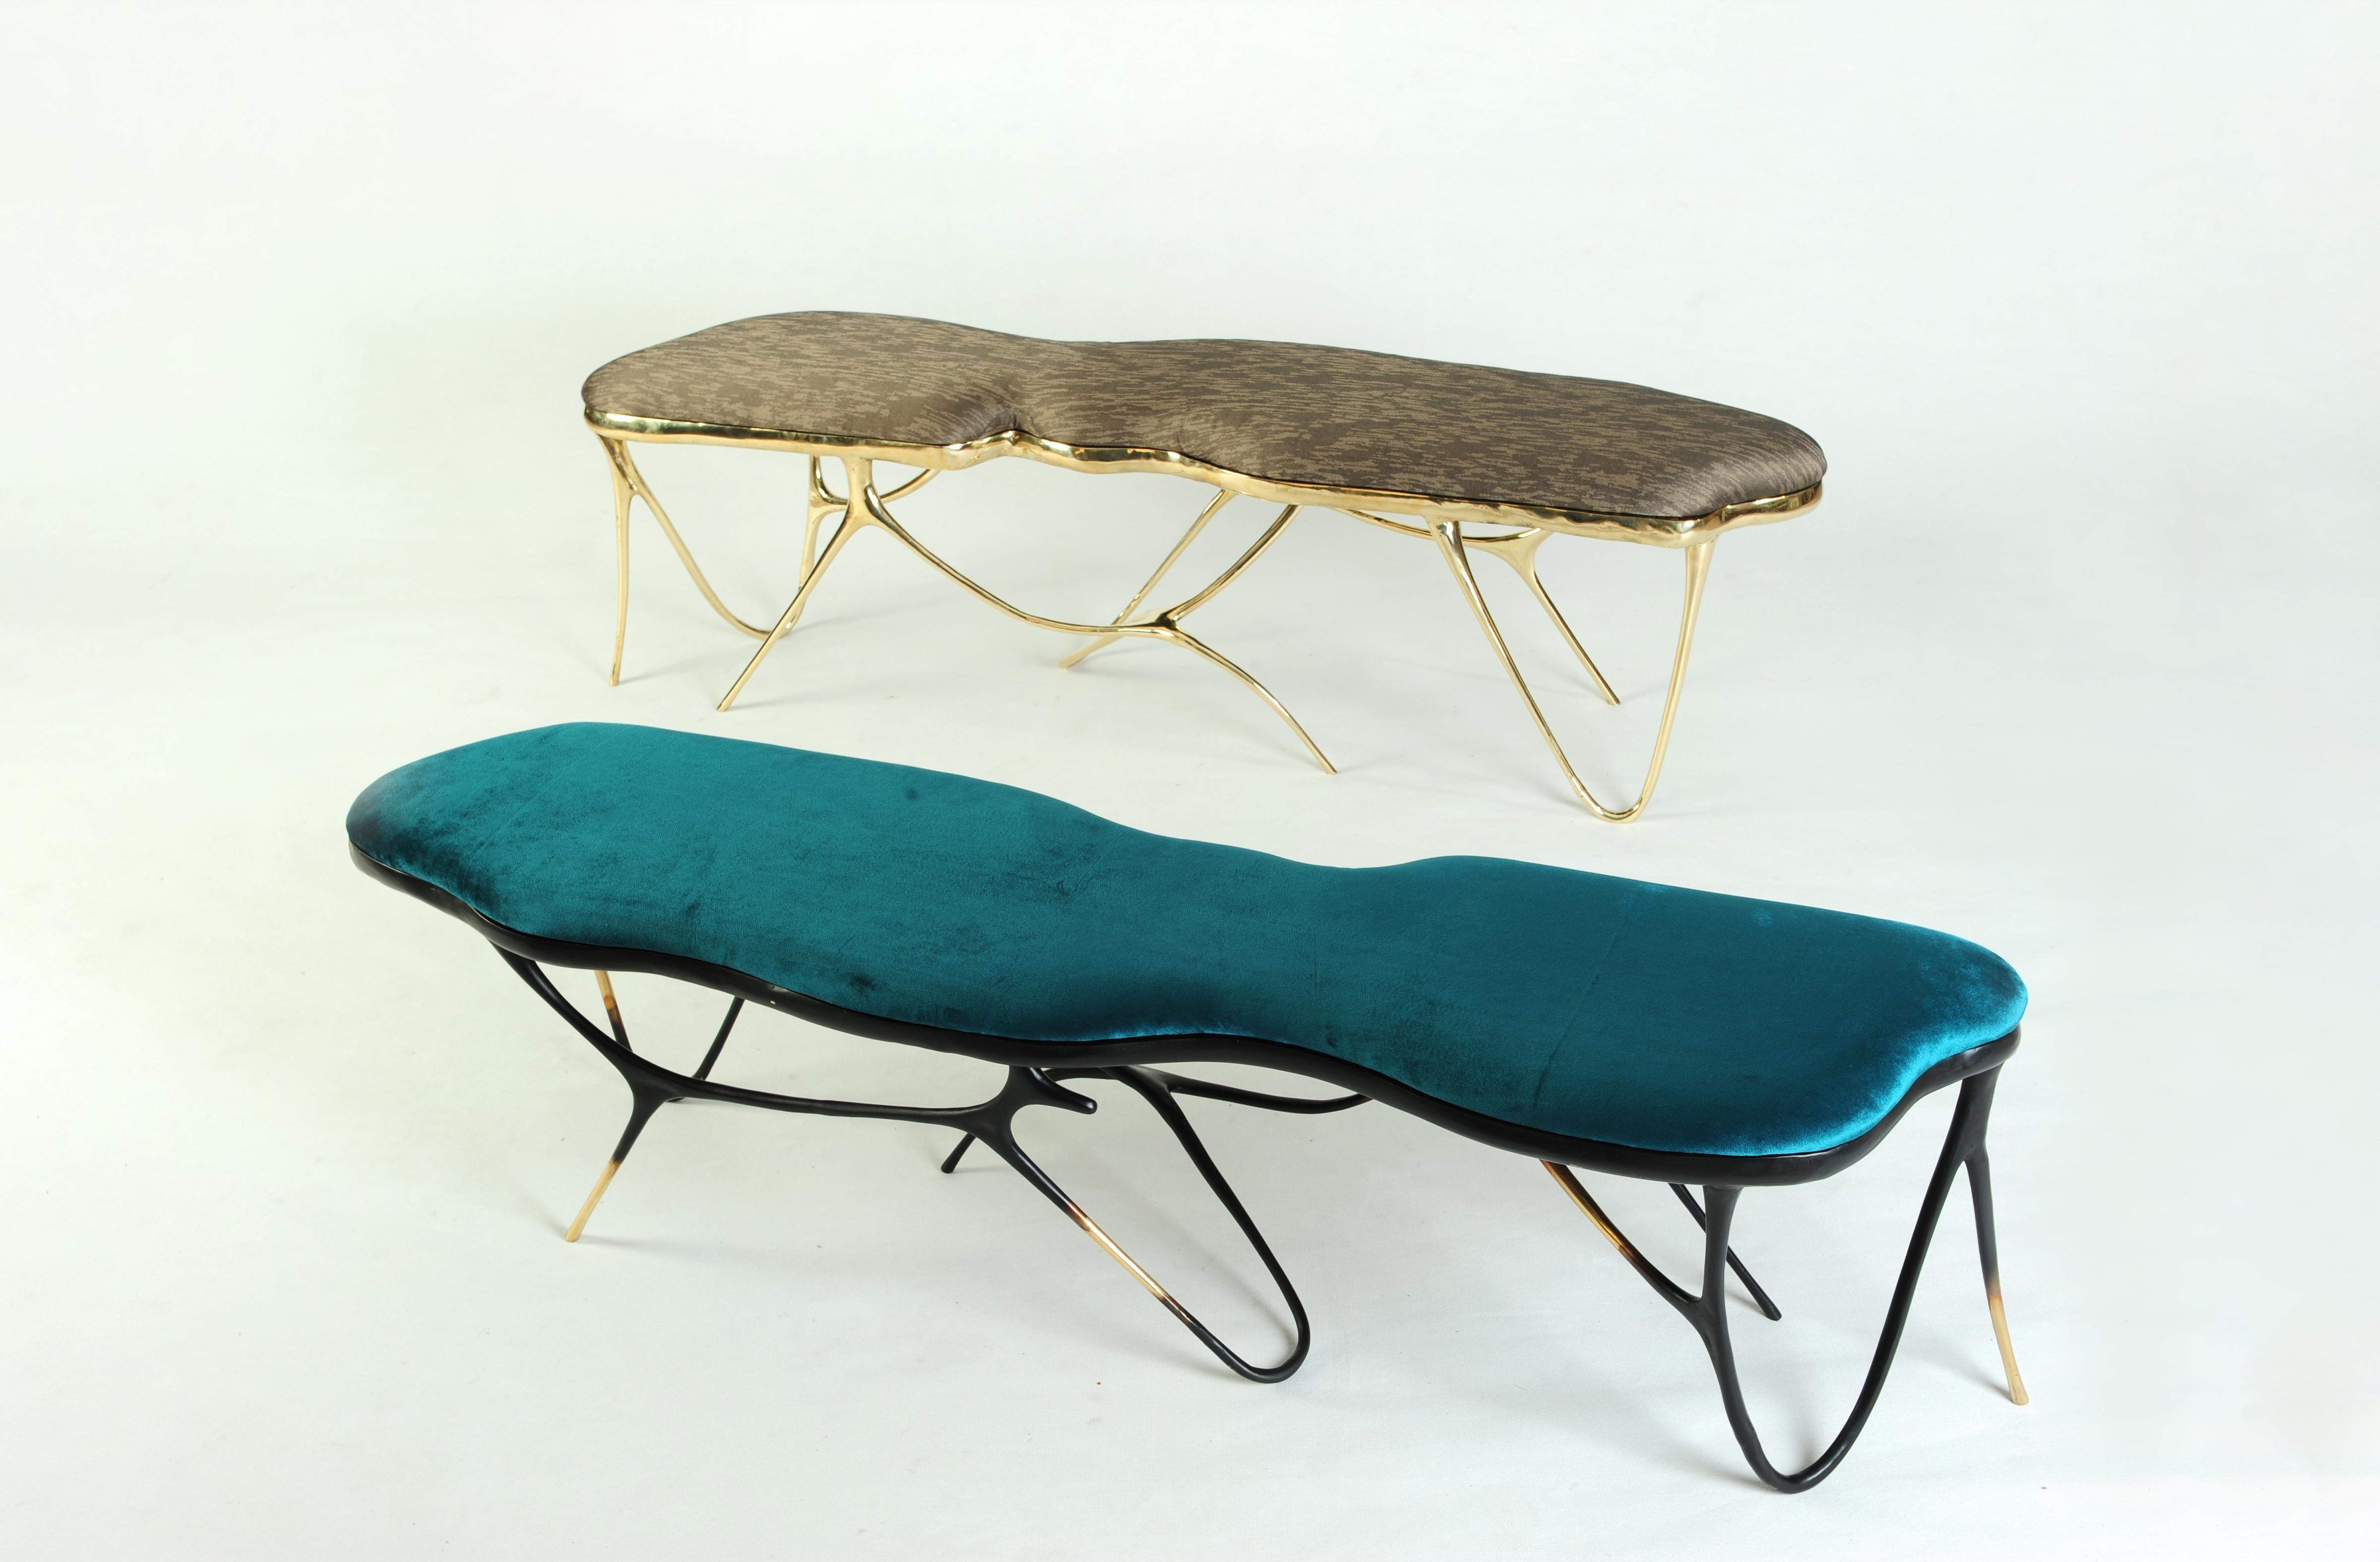 Calligraphic sculpted brass bench by Misaya
Dimensions: W 158 x L 38 x H 40 cm
Hand-sculpted brass table.

Misaya emulates Chinese ink paintings through the process of lost-wax casting.

Each piece in the Ink collection, which consists of a